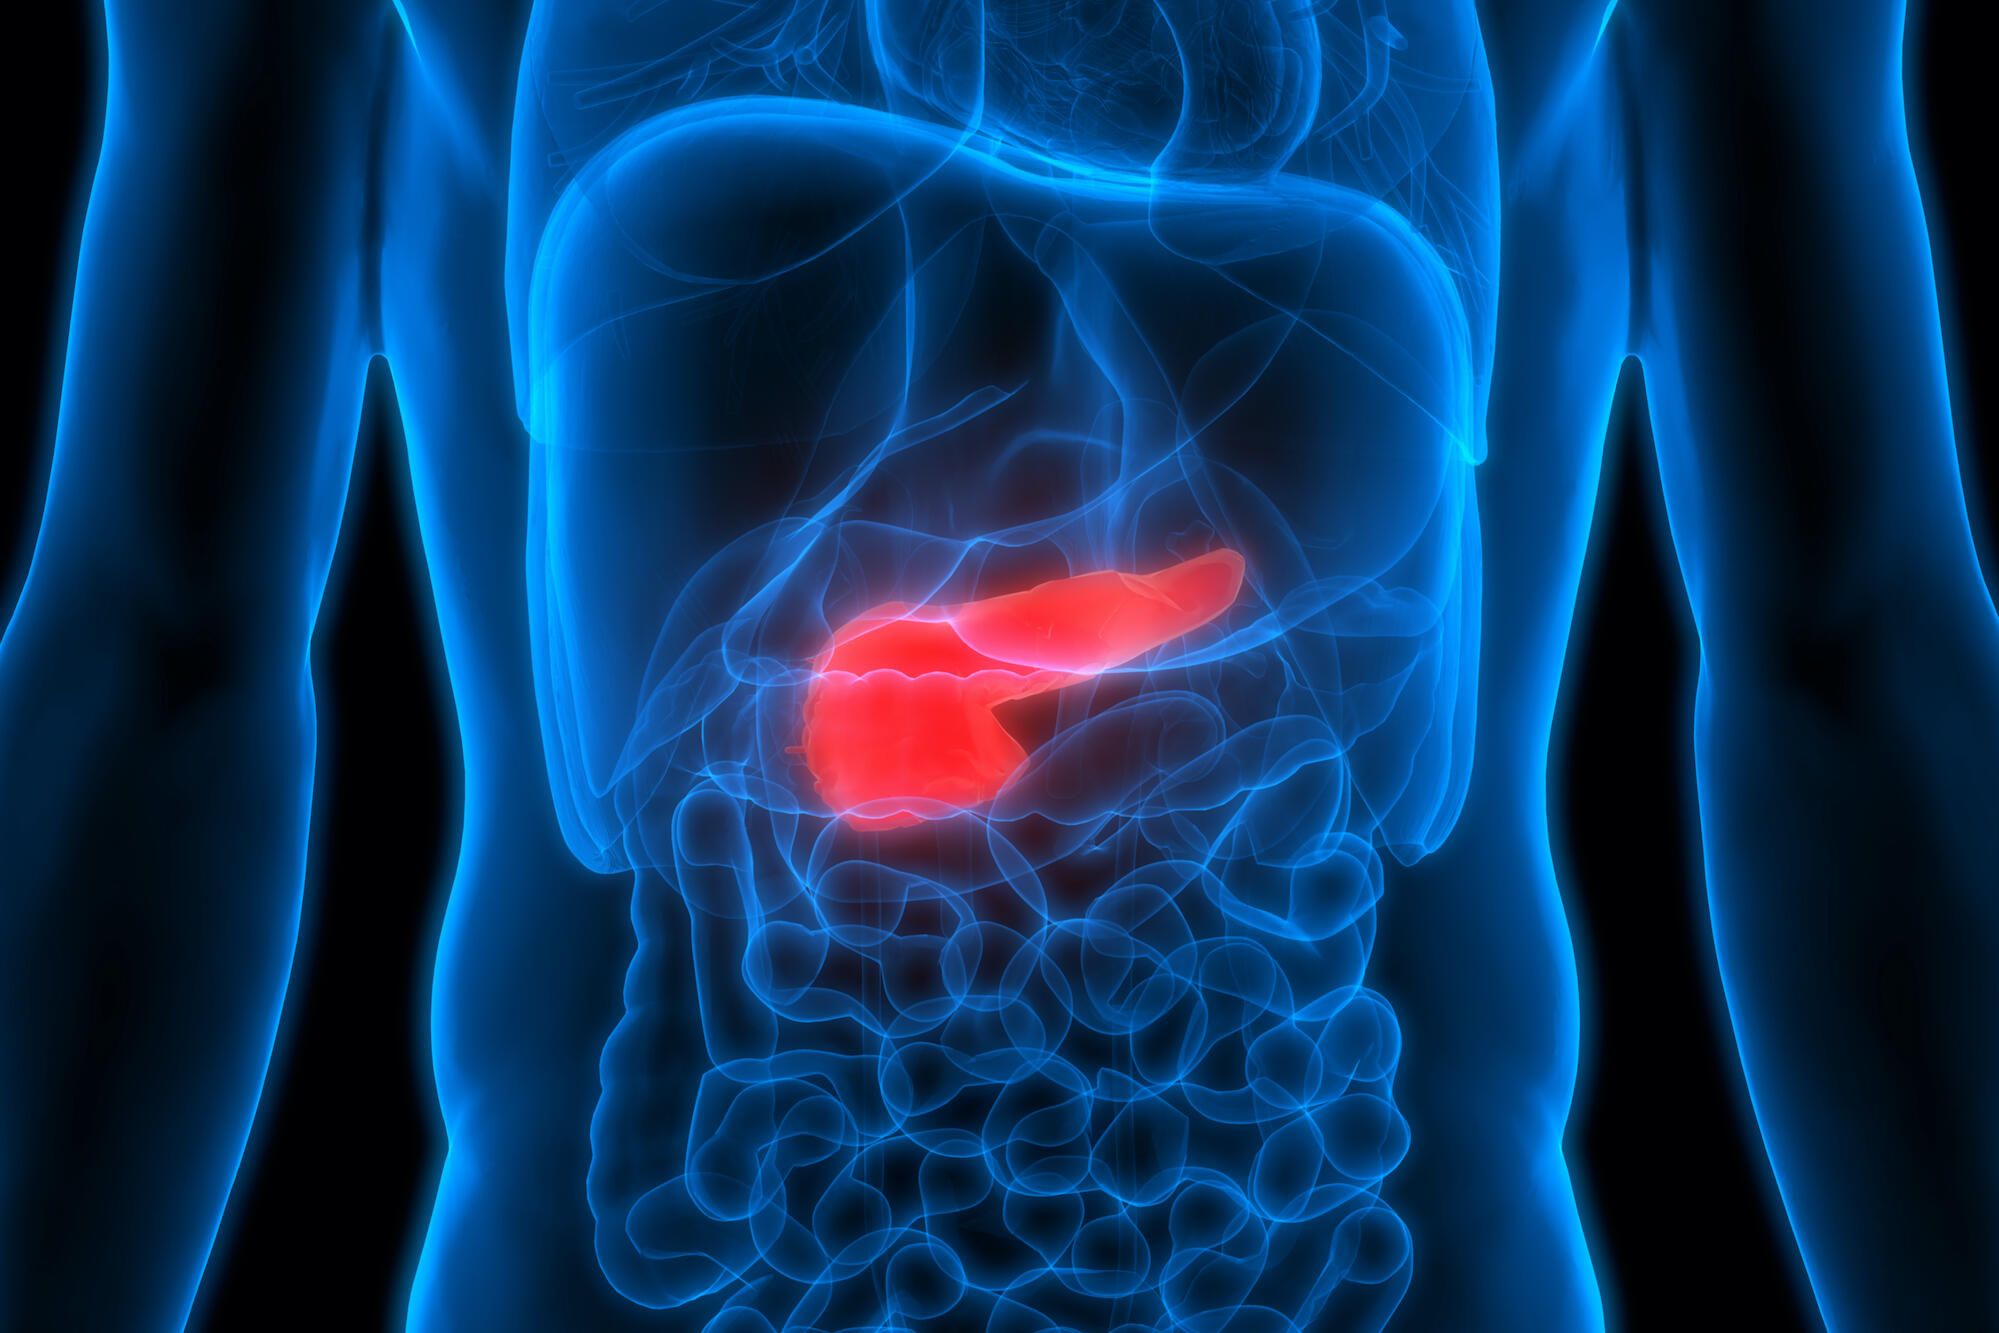 illustration of a person's abdomen with the pancreas highlighted in red